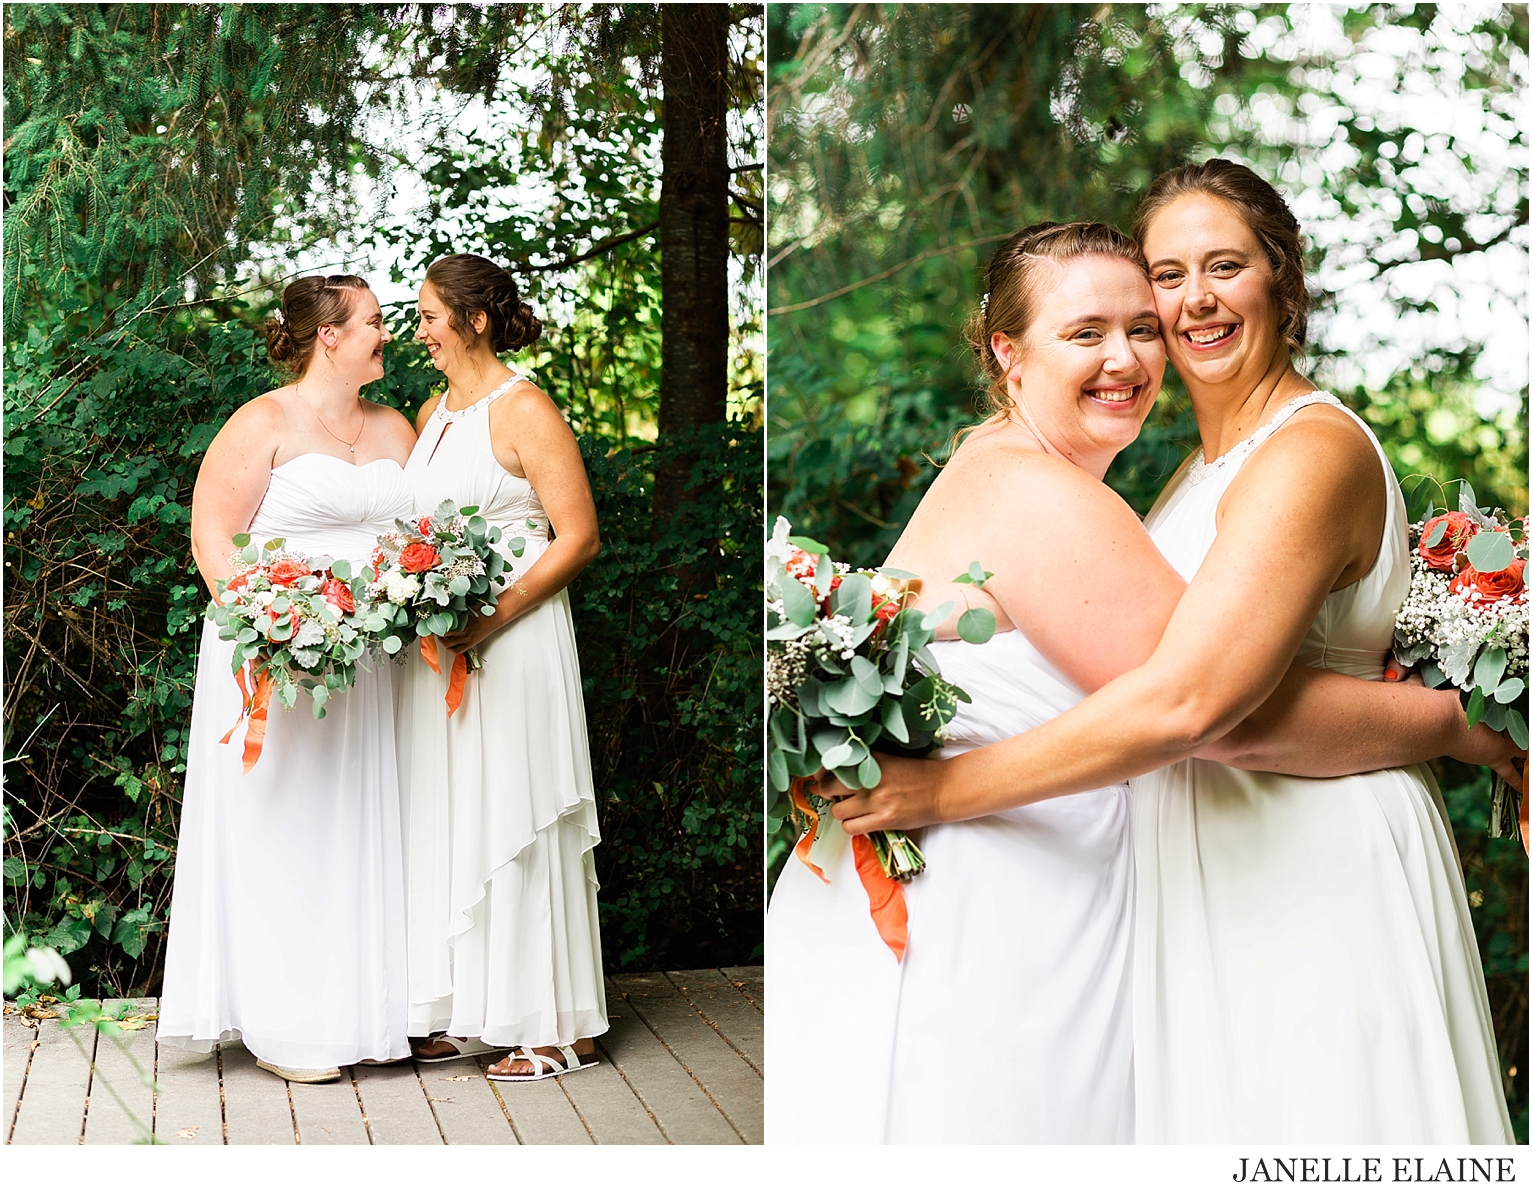 liz and christina lanning-first look and portraits-luther burbank park-janelle elaine photography-41.jpg